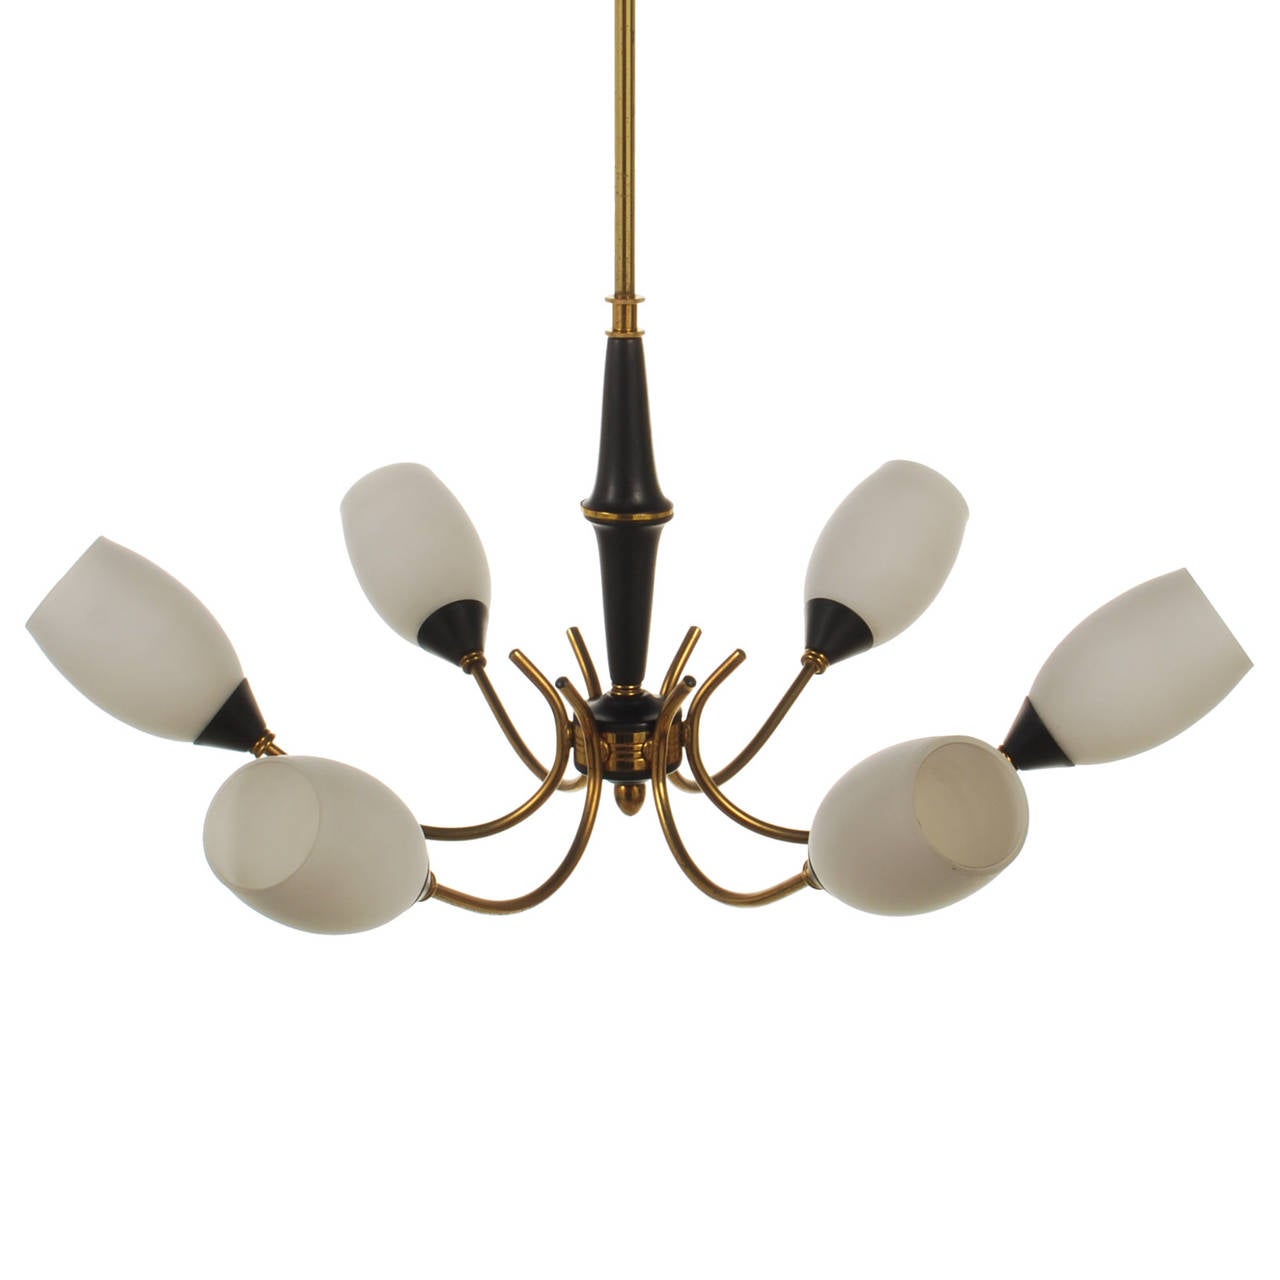 This is a splendid Mid-Century Modern Italian chandelier by Stilnovo. The brass has its original warm patina which looks very nice against the dark enamel details of the chandelier. It has six arms with white frosted shades on the ends. One shade